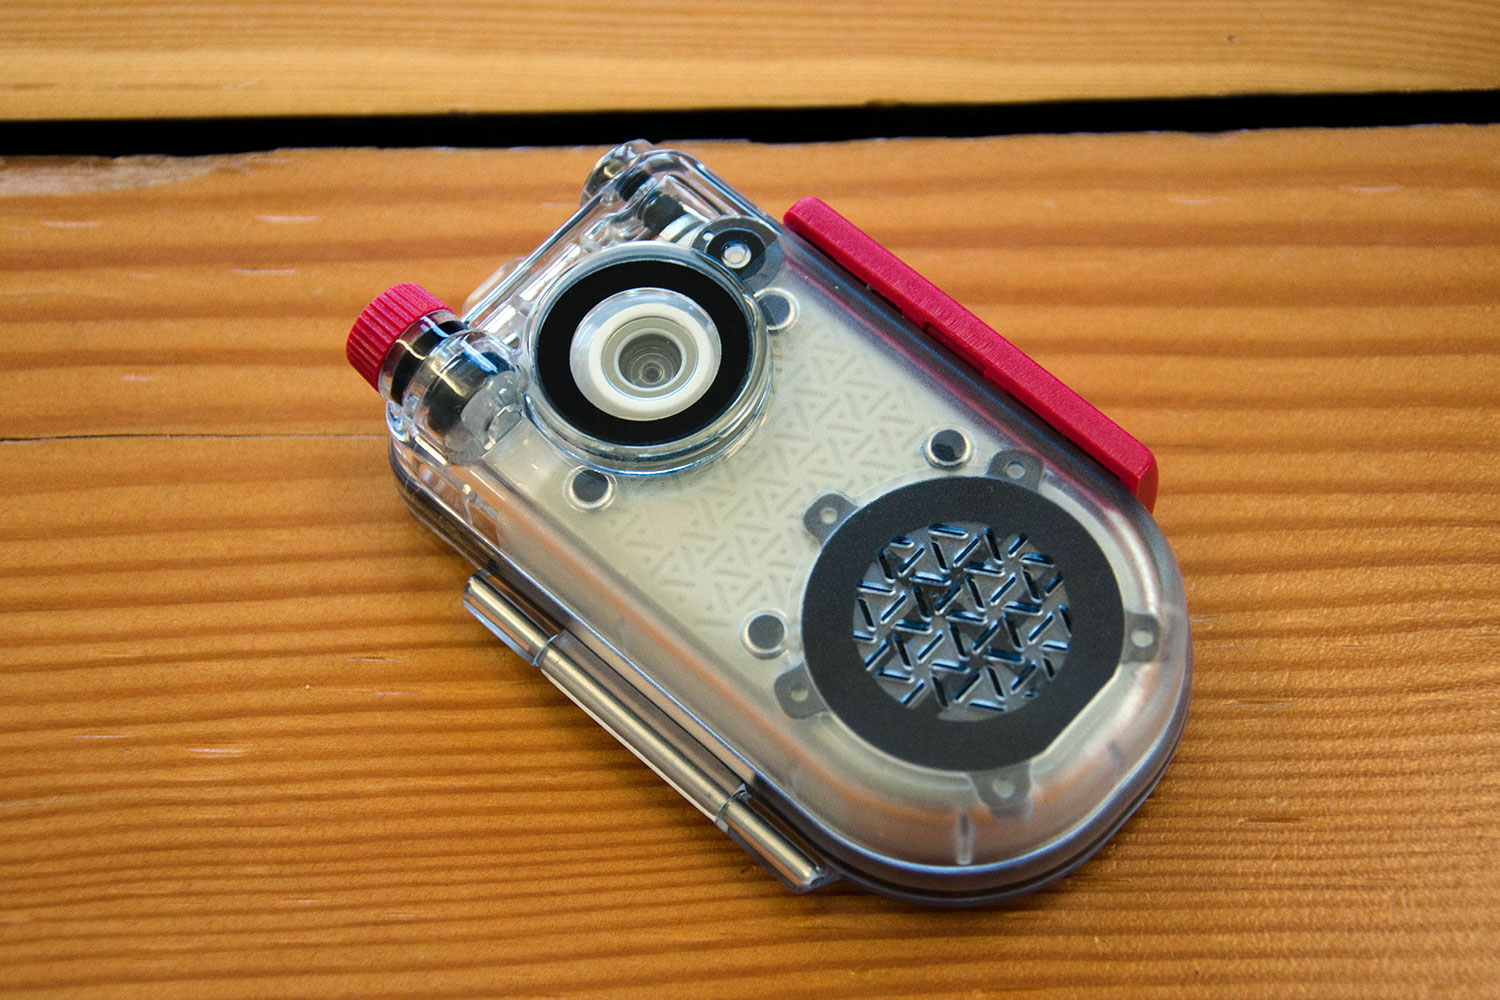 zagg now cam is a pocket camcorder that doubles as mini bluetooth speaker 8618